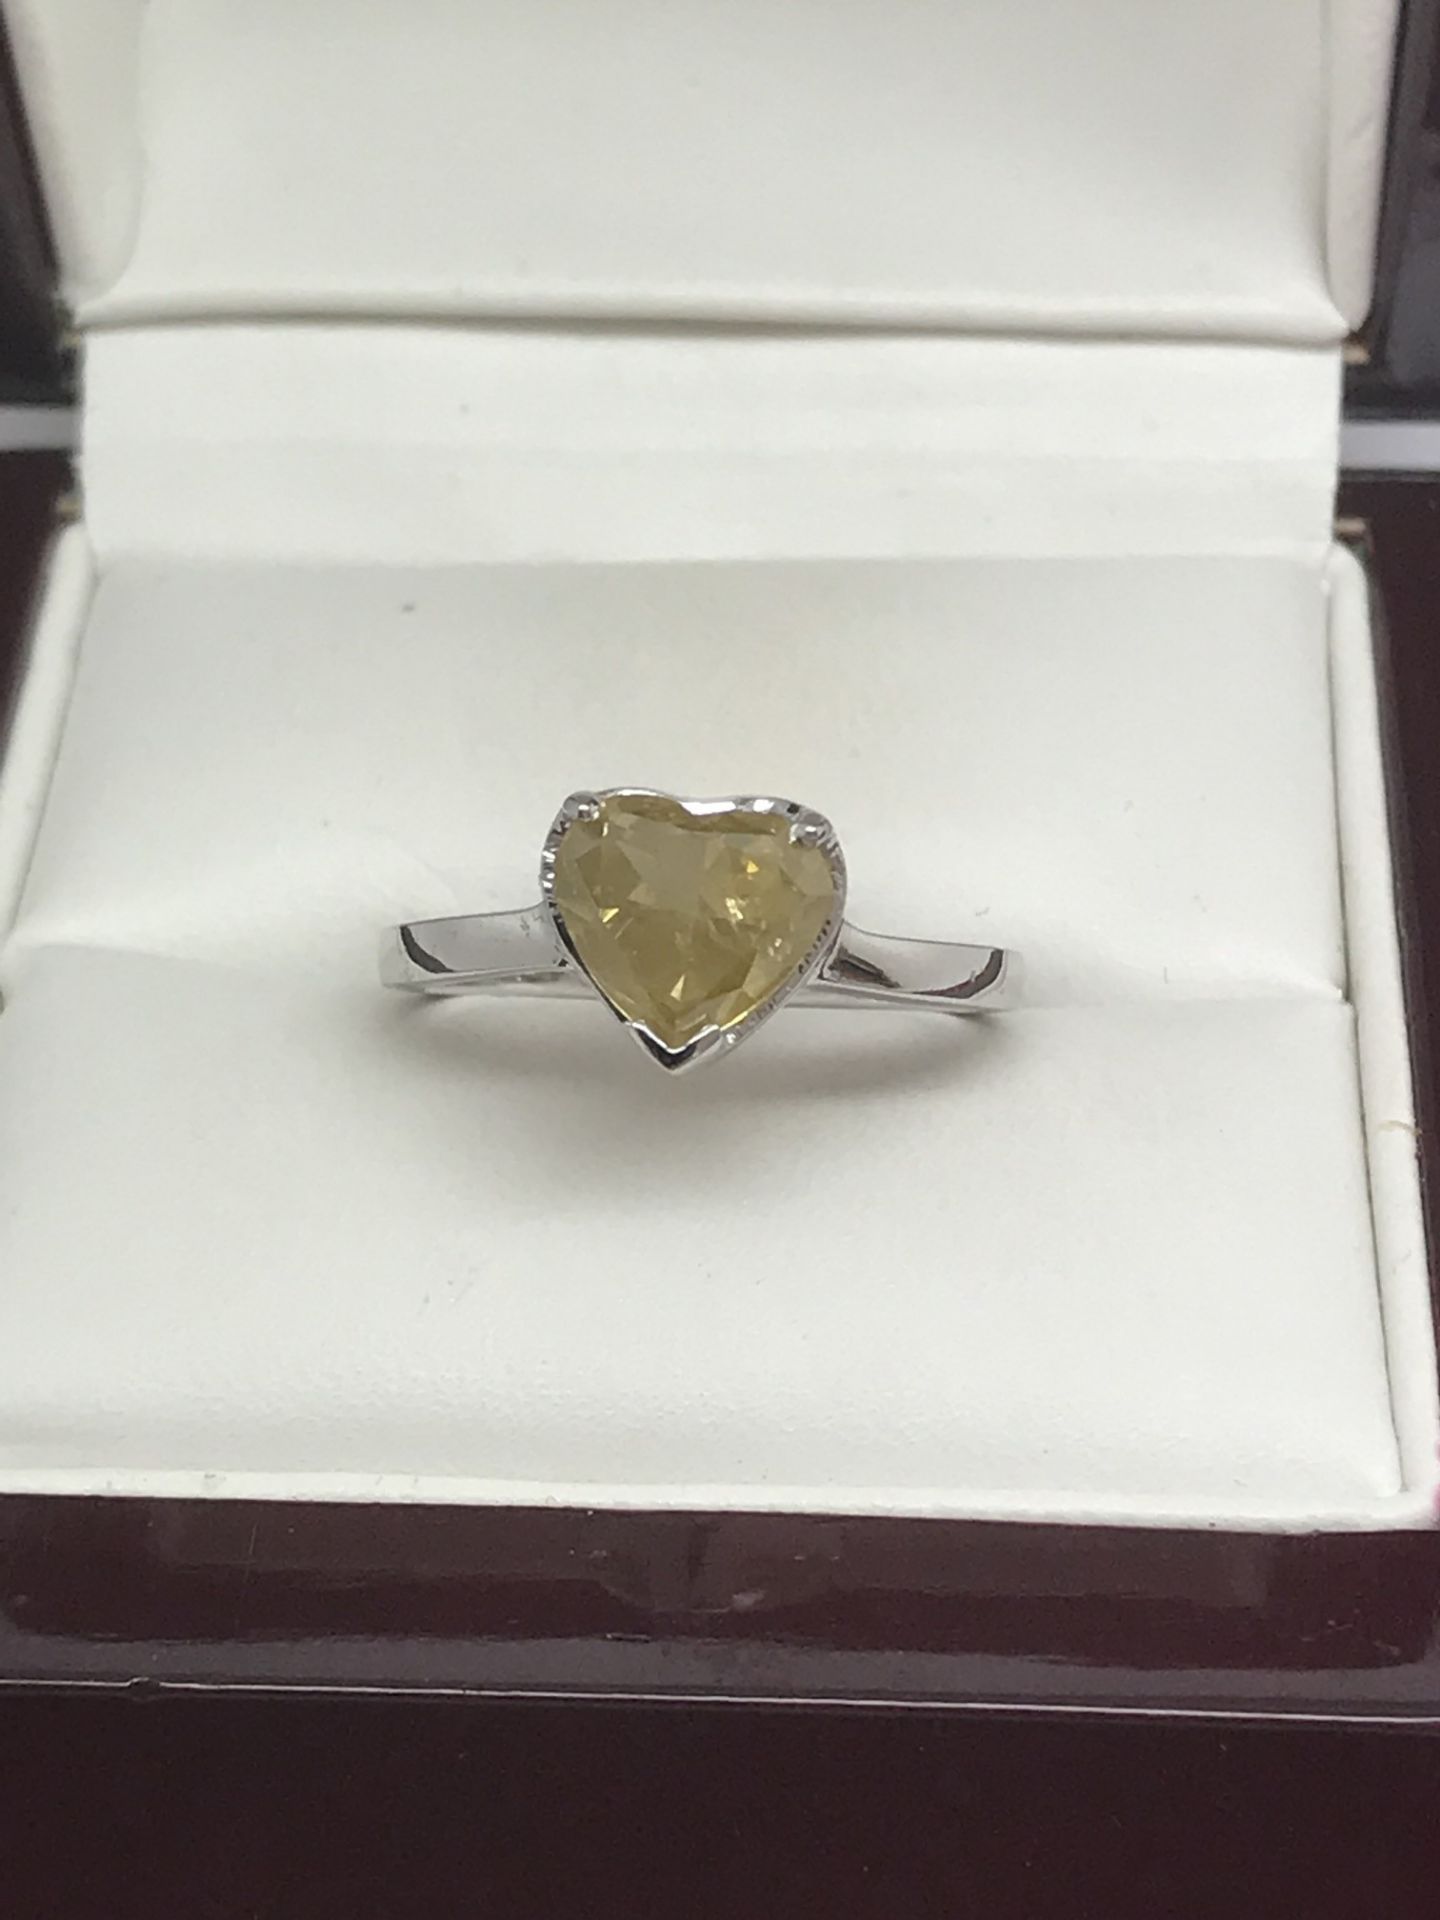 2.01ct YELLOW DIAMOND SOLITAIRE RING SET IN WHITE METAL MARKED 750 TESTED AS 18ct